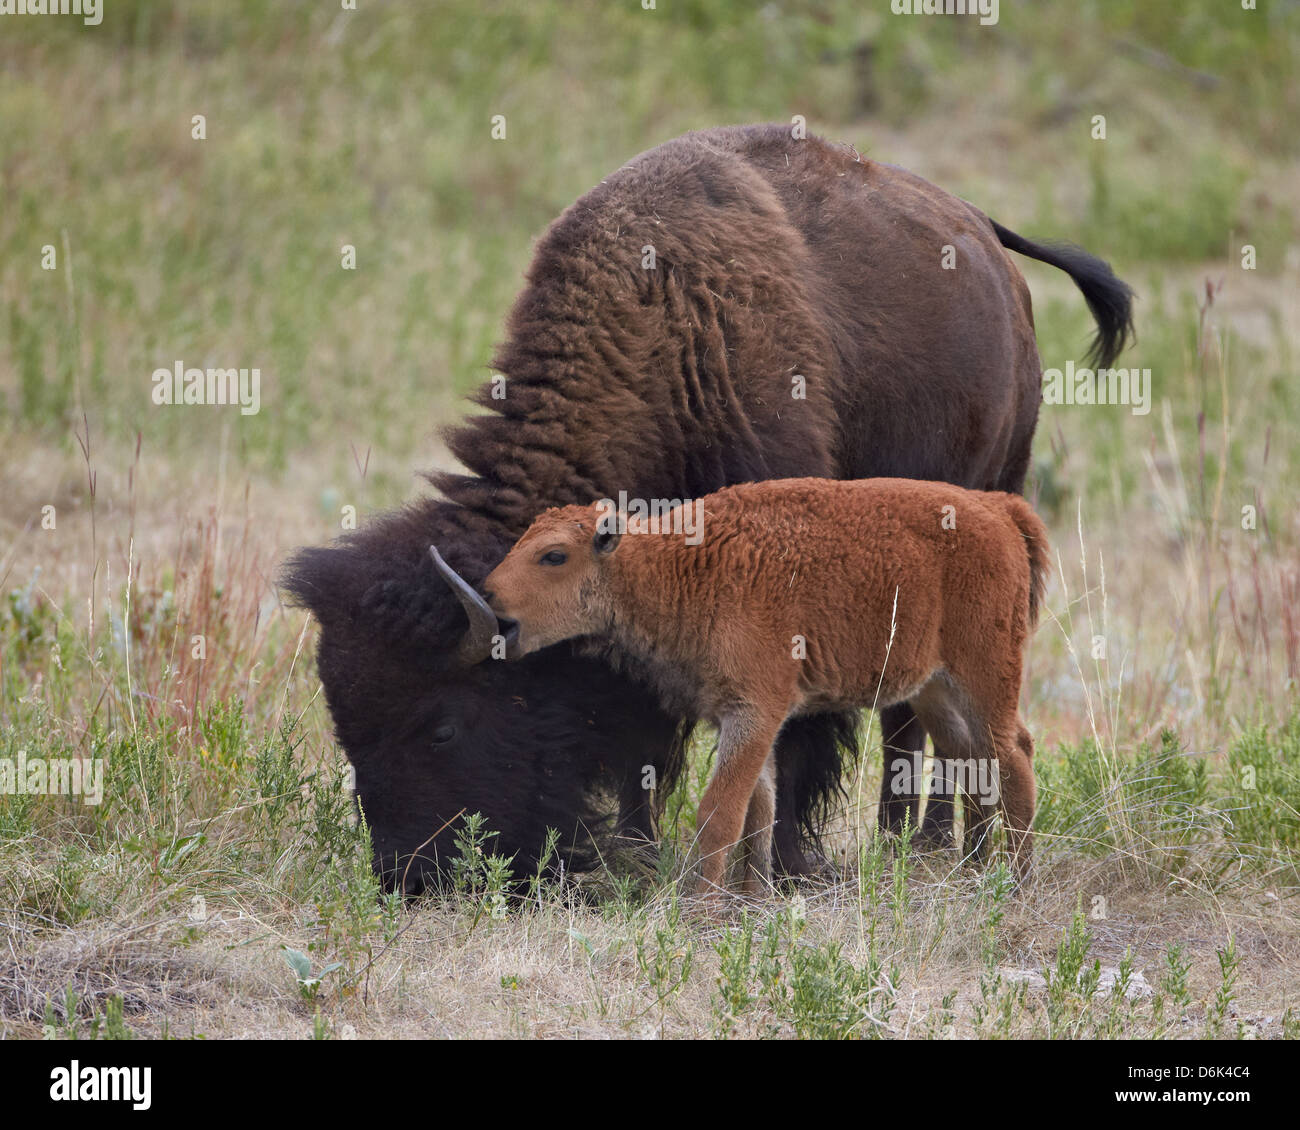 Bison (Bison bison) calf playing with its mother, Custer State Park, South Dakota, United States of America, North America Stock Photo